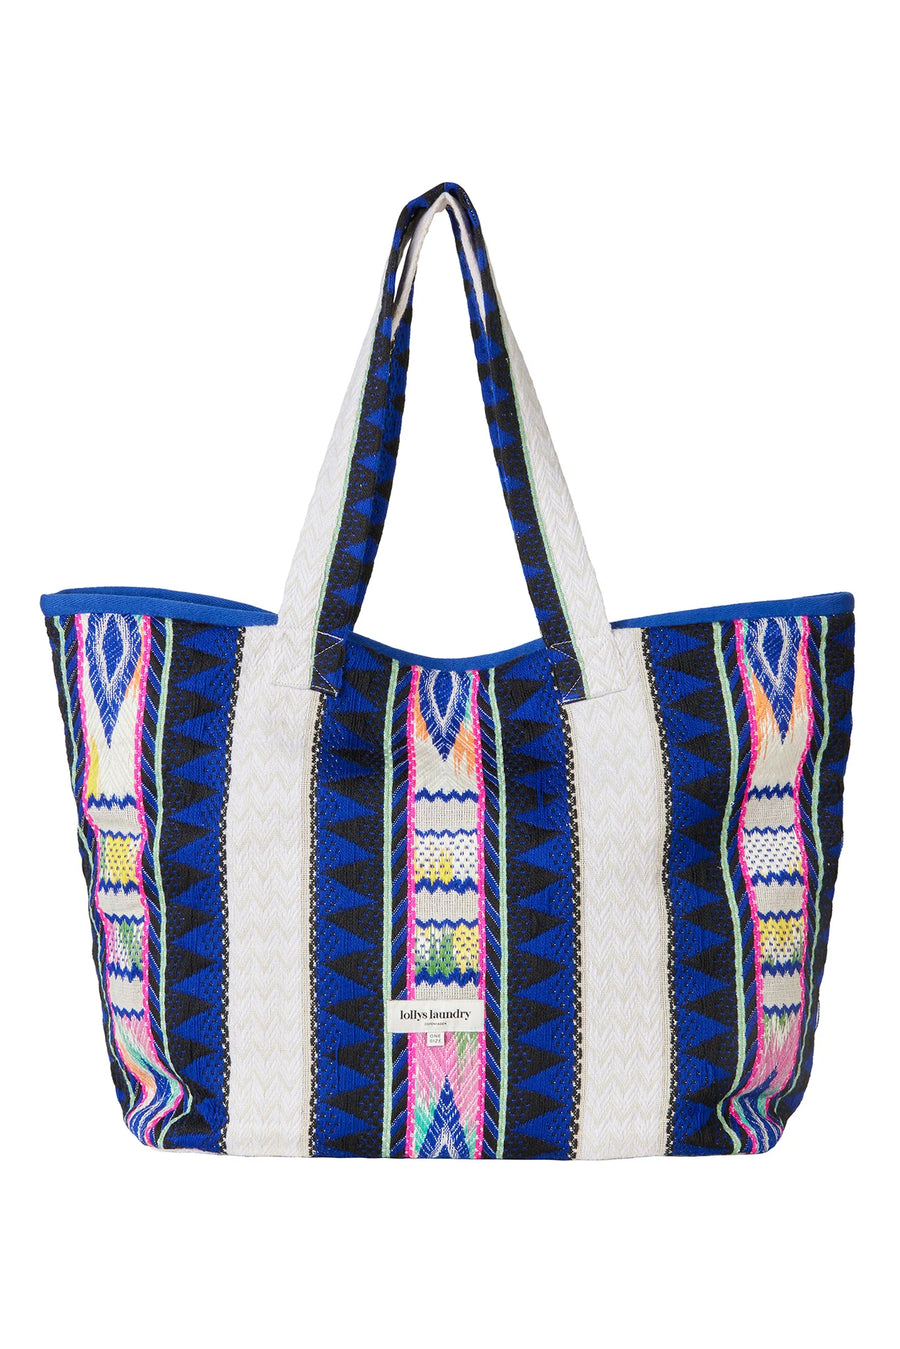 Lollys Laundry Annalee Tote Bag Hold-all Weekend Jacquard Multi